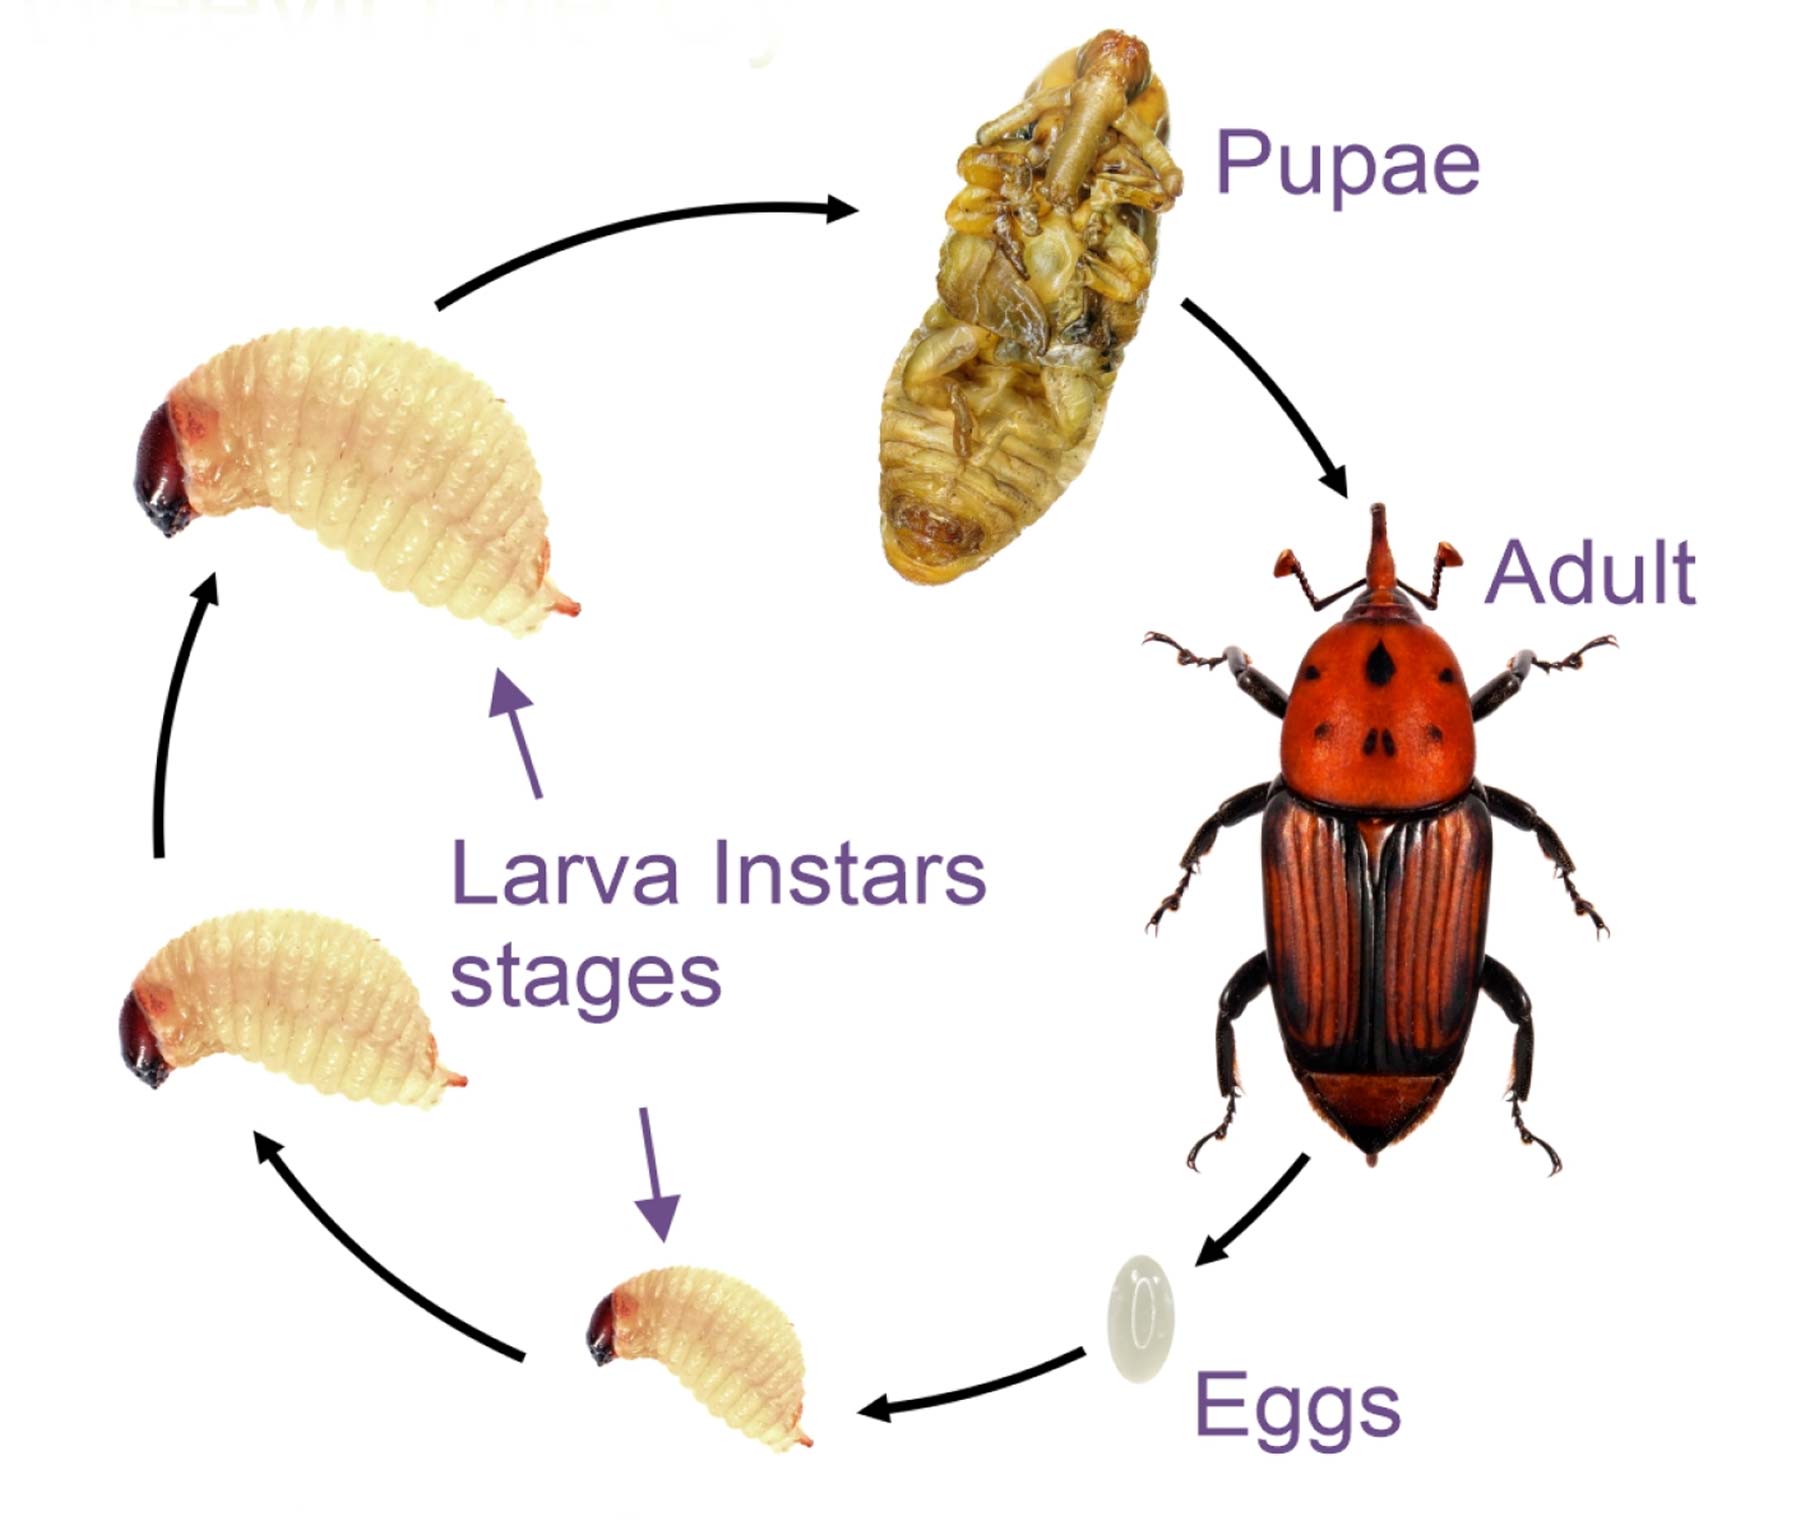 What is the weevil life cycle?